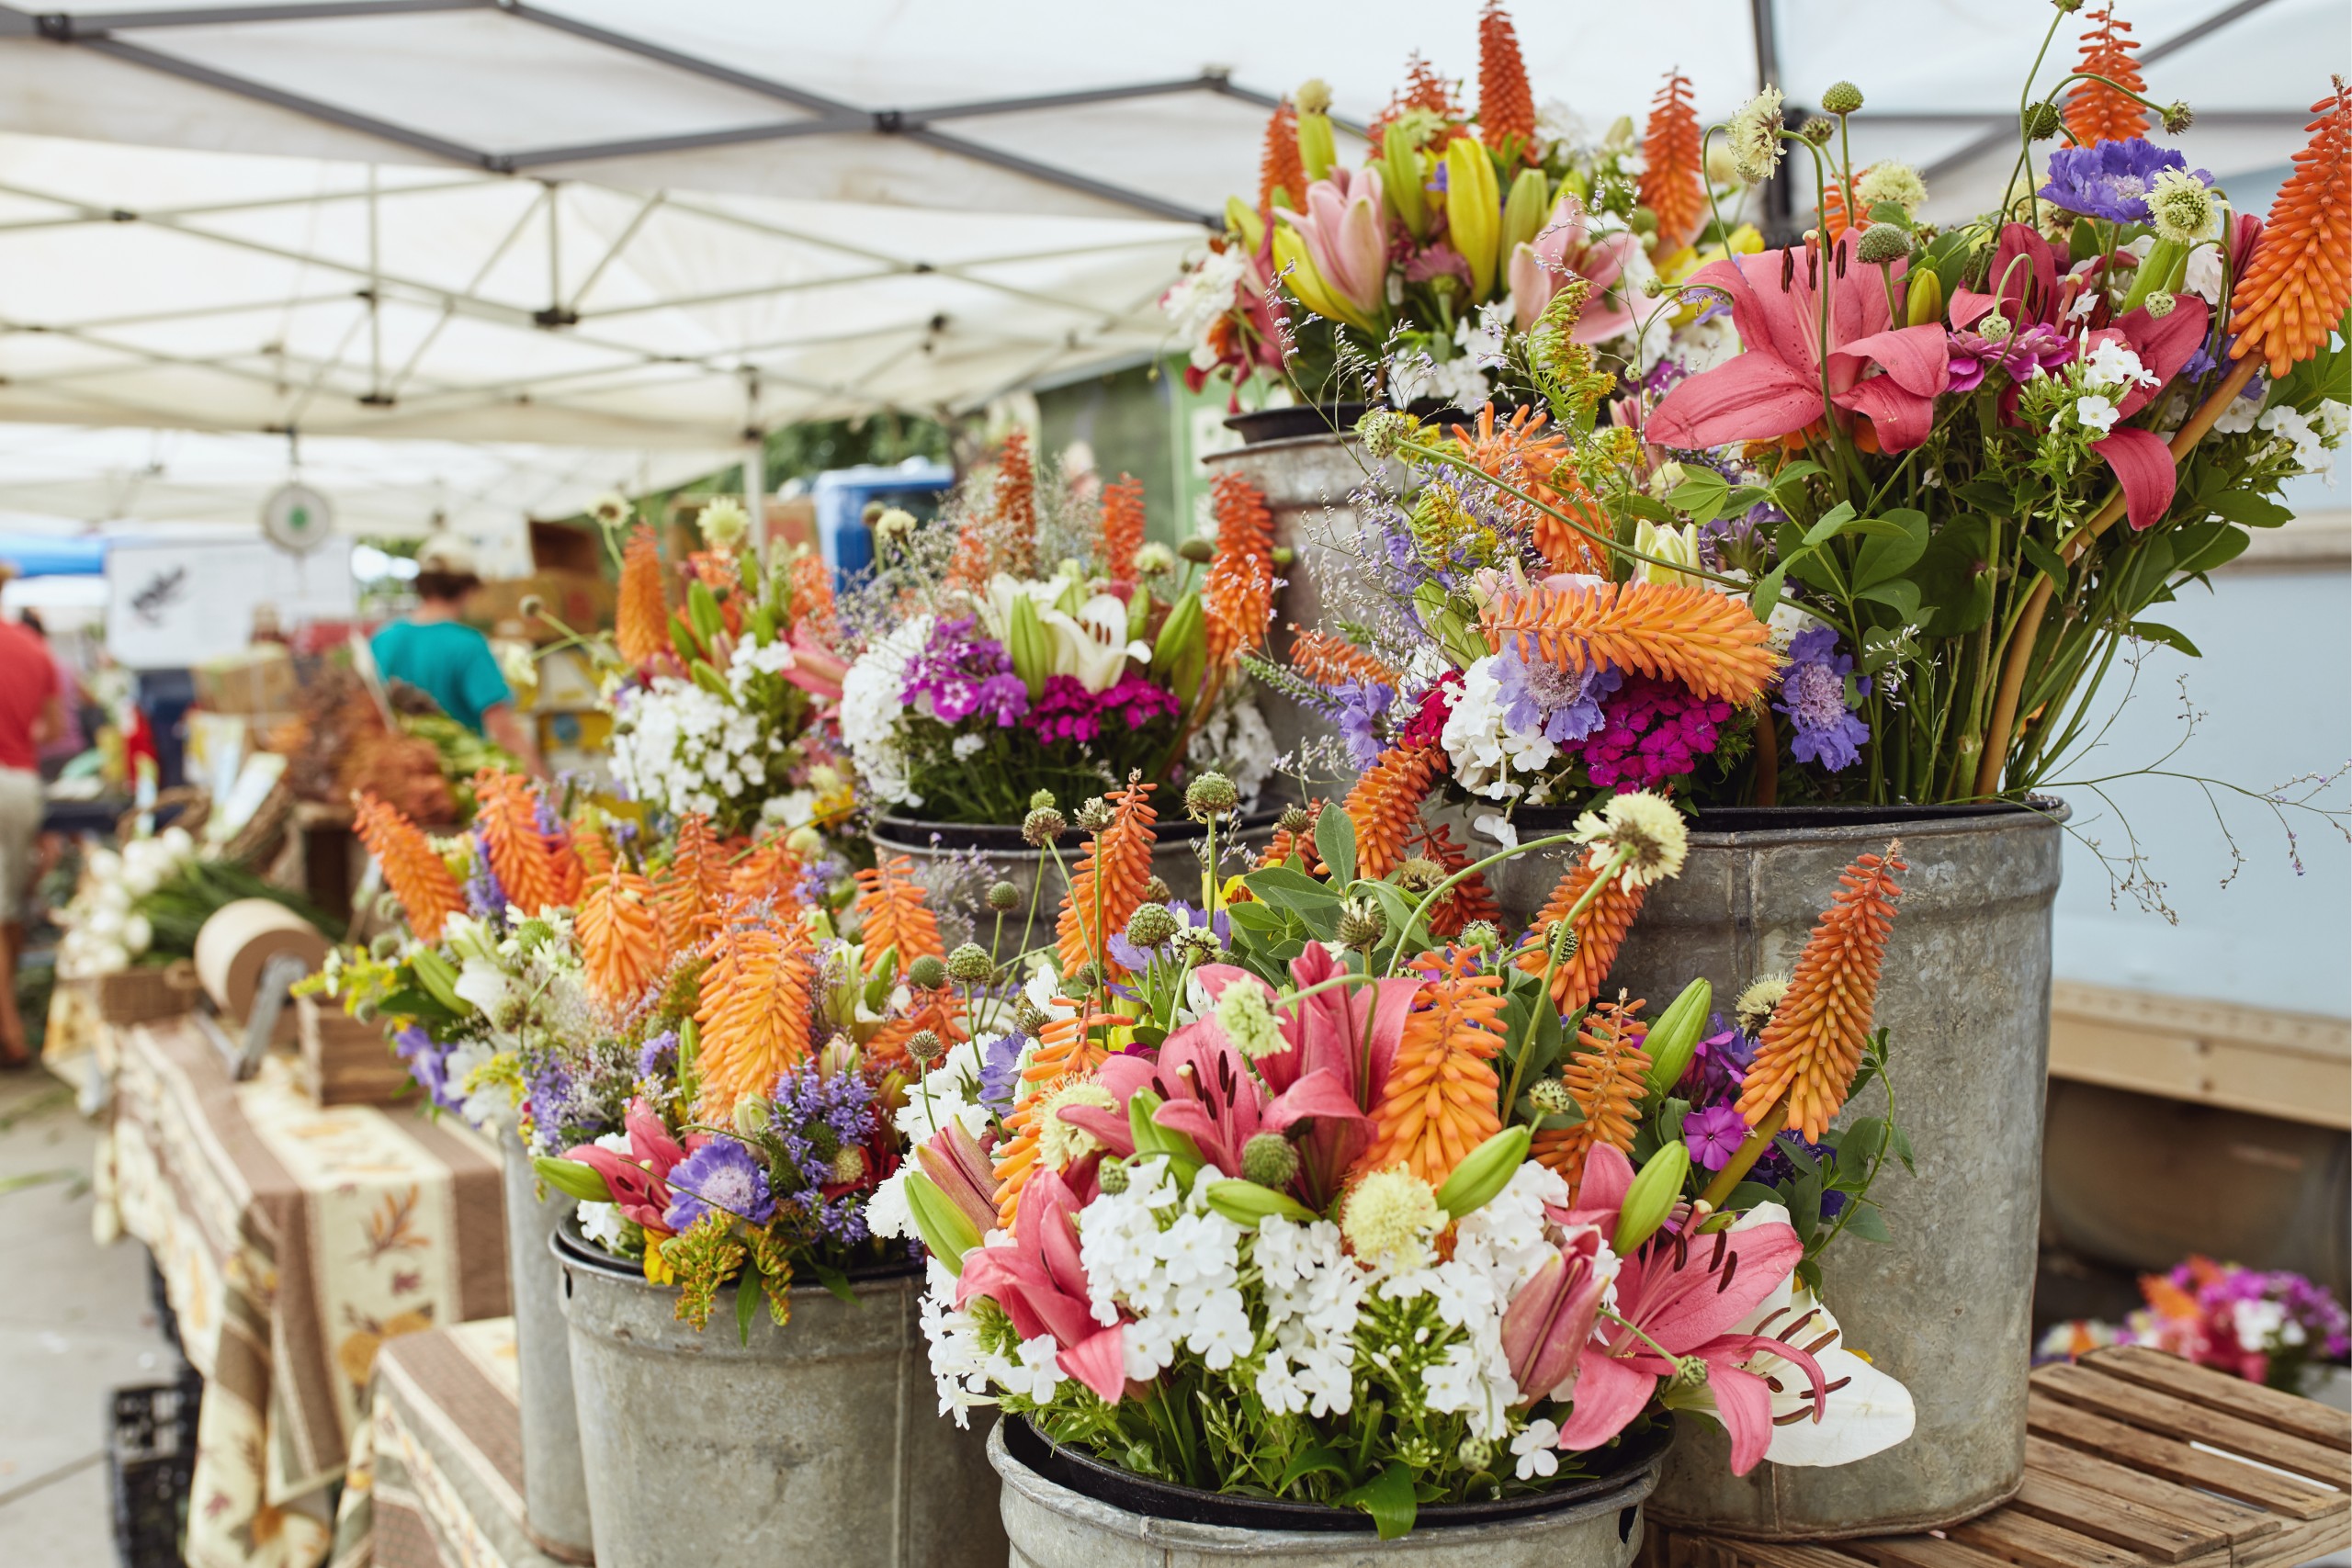 Fresh colorful flowers at an open air market